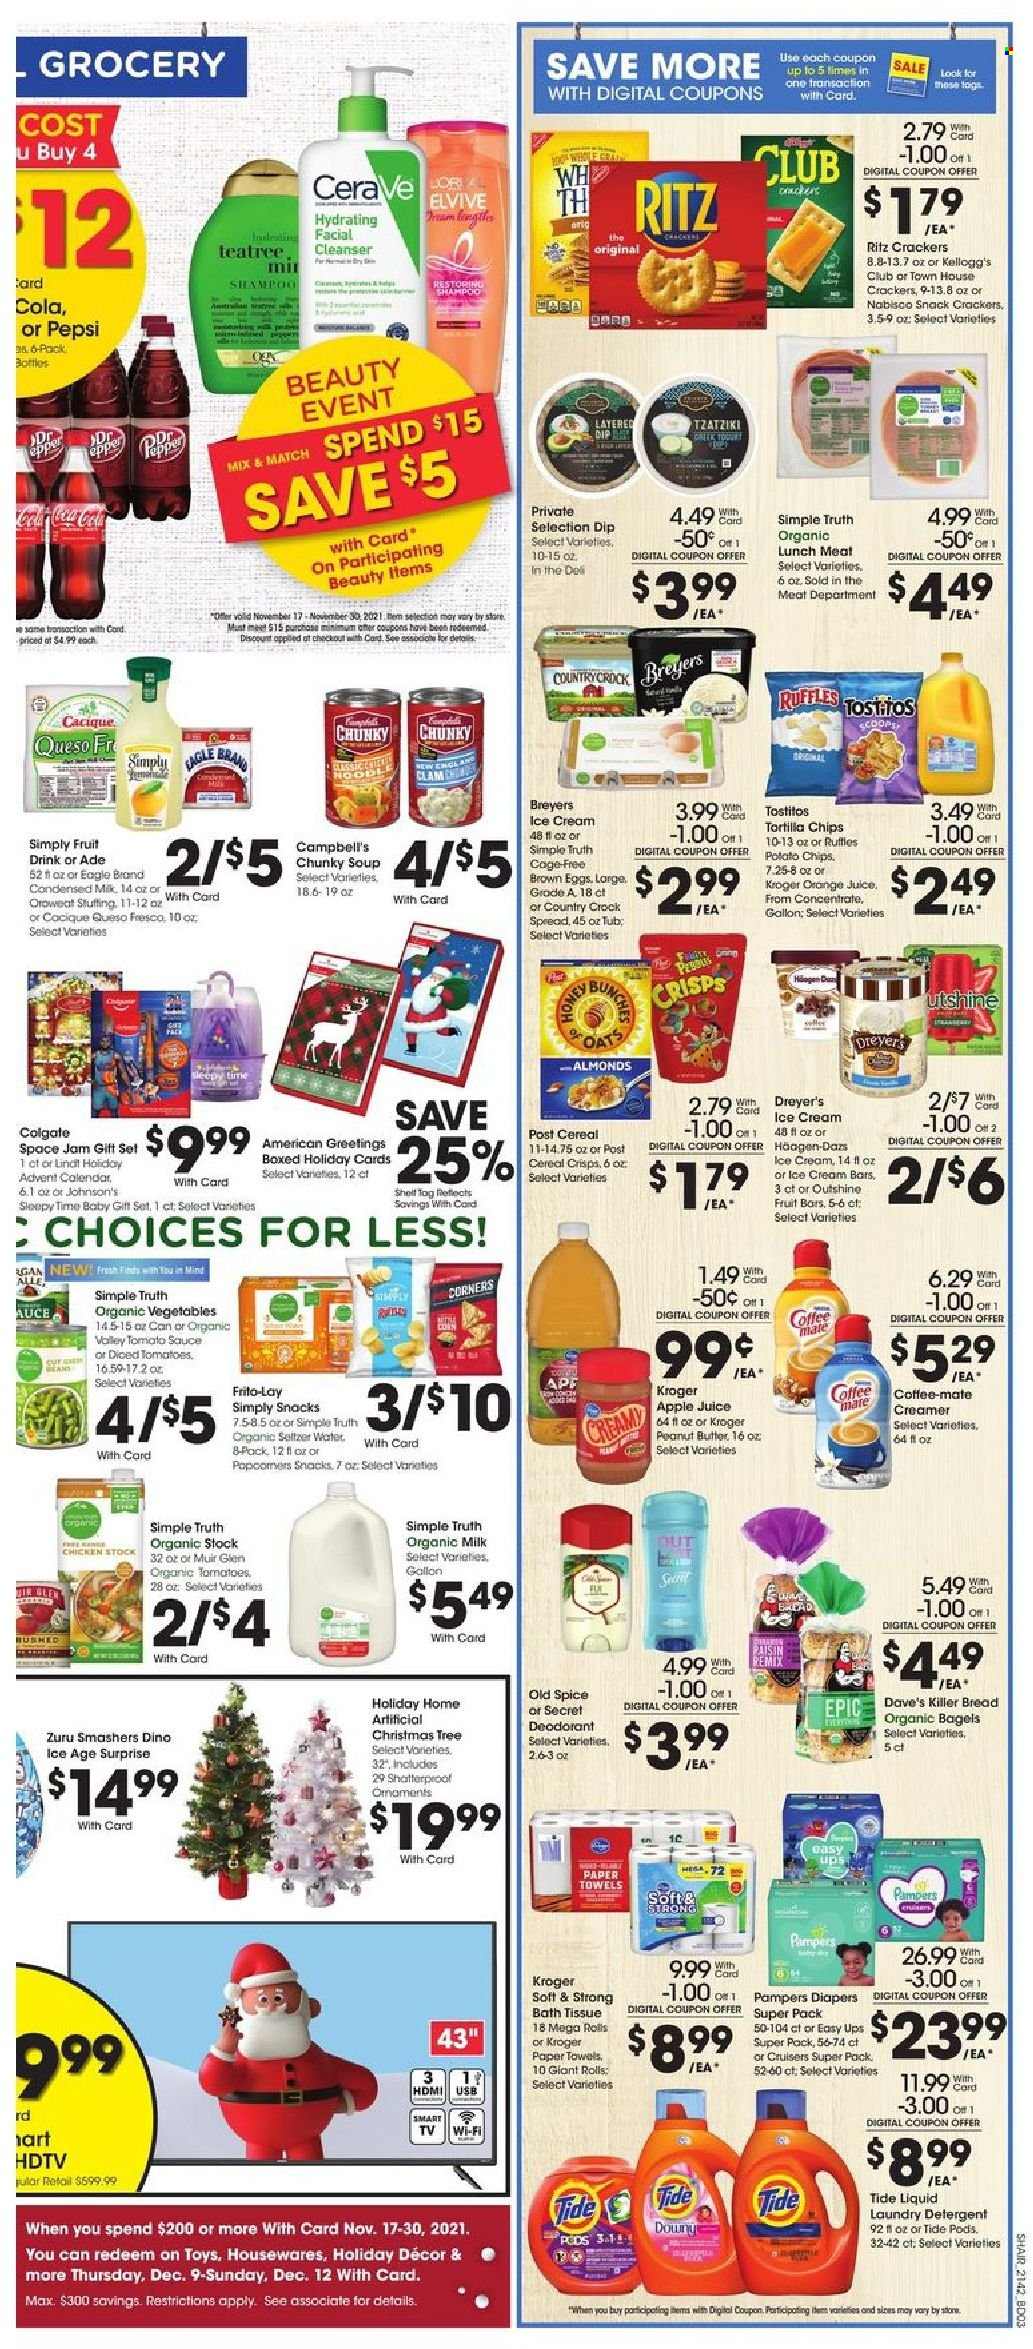 thumbnail - Kroger Flyer - 11/17/2021 - 11/25/2021 - Sales products - christmas tree, bagels, bread, clams, soup, tzatziki, lunch meat, queso fresco, Coffee-Mate, organic milk, eggs, creamer, dip, ice cream, gift set, snack, Lindt, crackers, Kellogg's, RITZ, tortilla chips, chips, Frito-Lay, Ruffles, Tostitos, cereals, spice, fruit jam, peanut butter, almonds, apple juice, Pepsi, orange juice, juice, fruit drink, seltzer water, L'Or, Pampers, nappies, Johnson's, bath tissue, kitchen towels, paper towels, detergent, Tide, laundry detergent, shampoo, Old Spice, Colgate, cleanser, anti-perspirant, deodorant, HDTV, TV, toys, Zuru. Page 6.